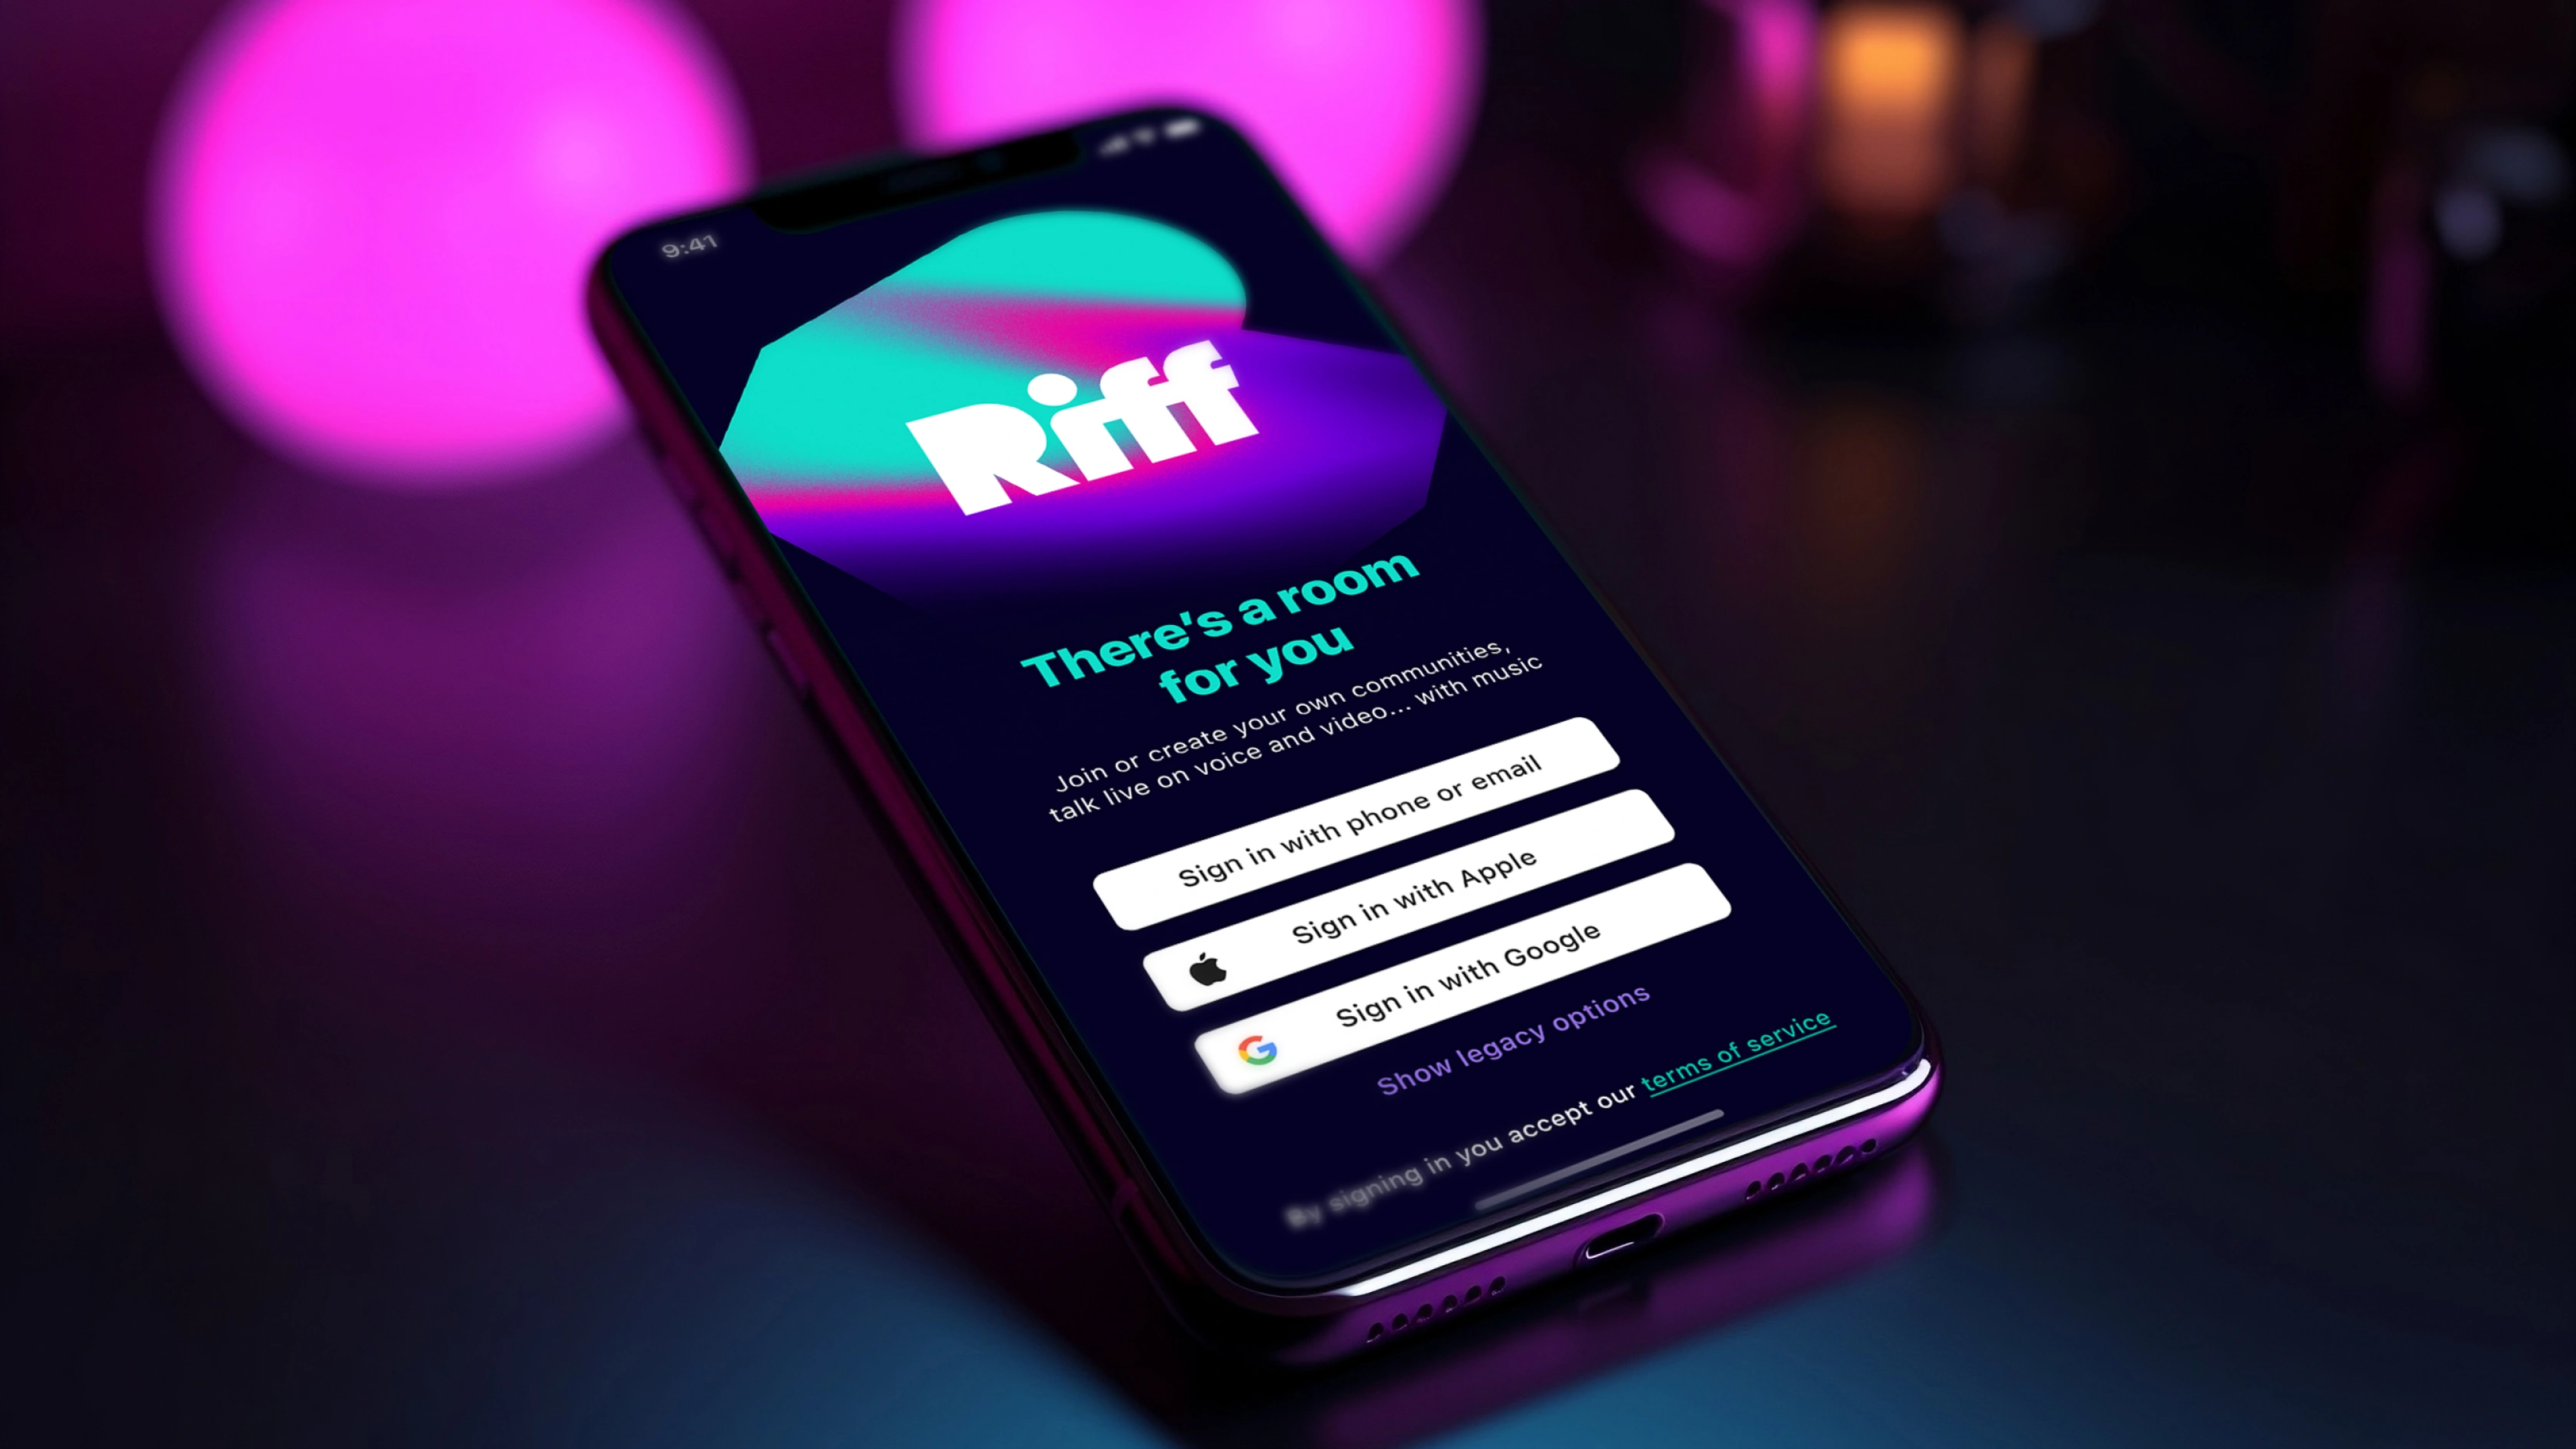 Riff UI and UX mobile app splash page design by Bodkin